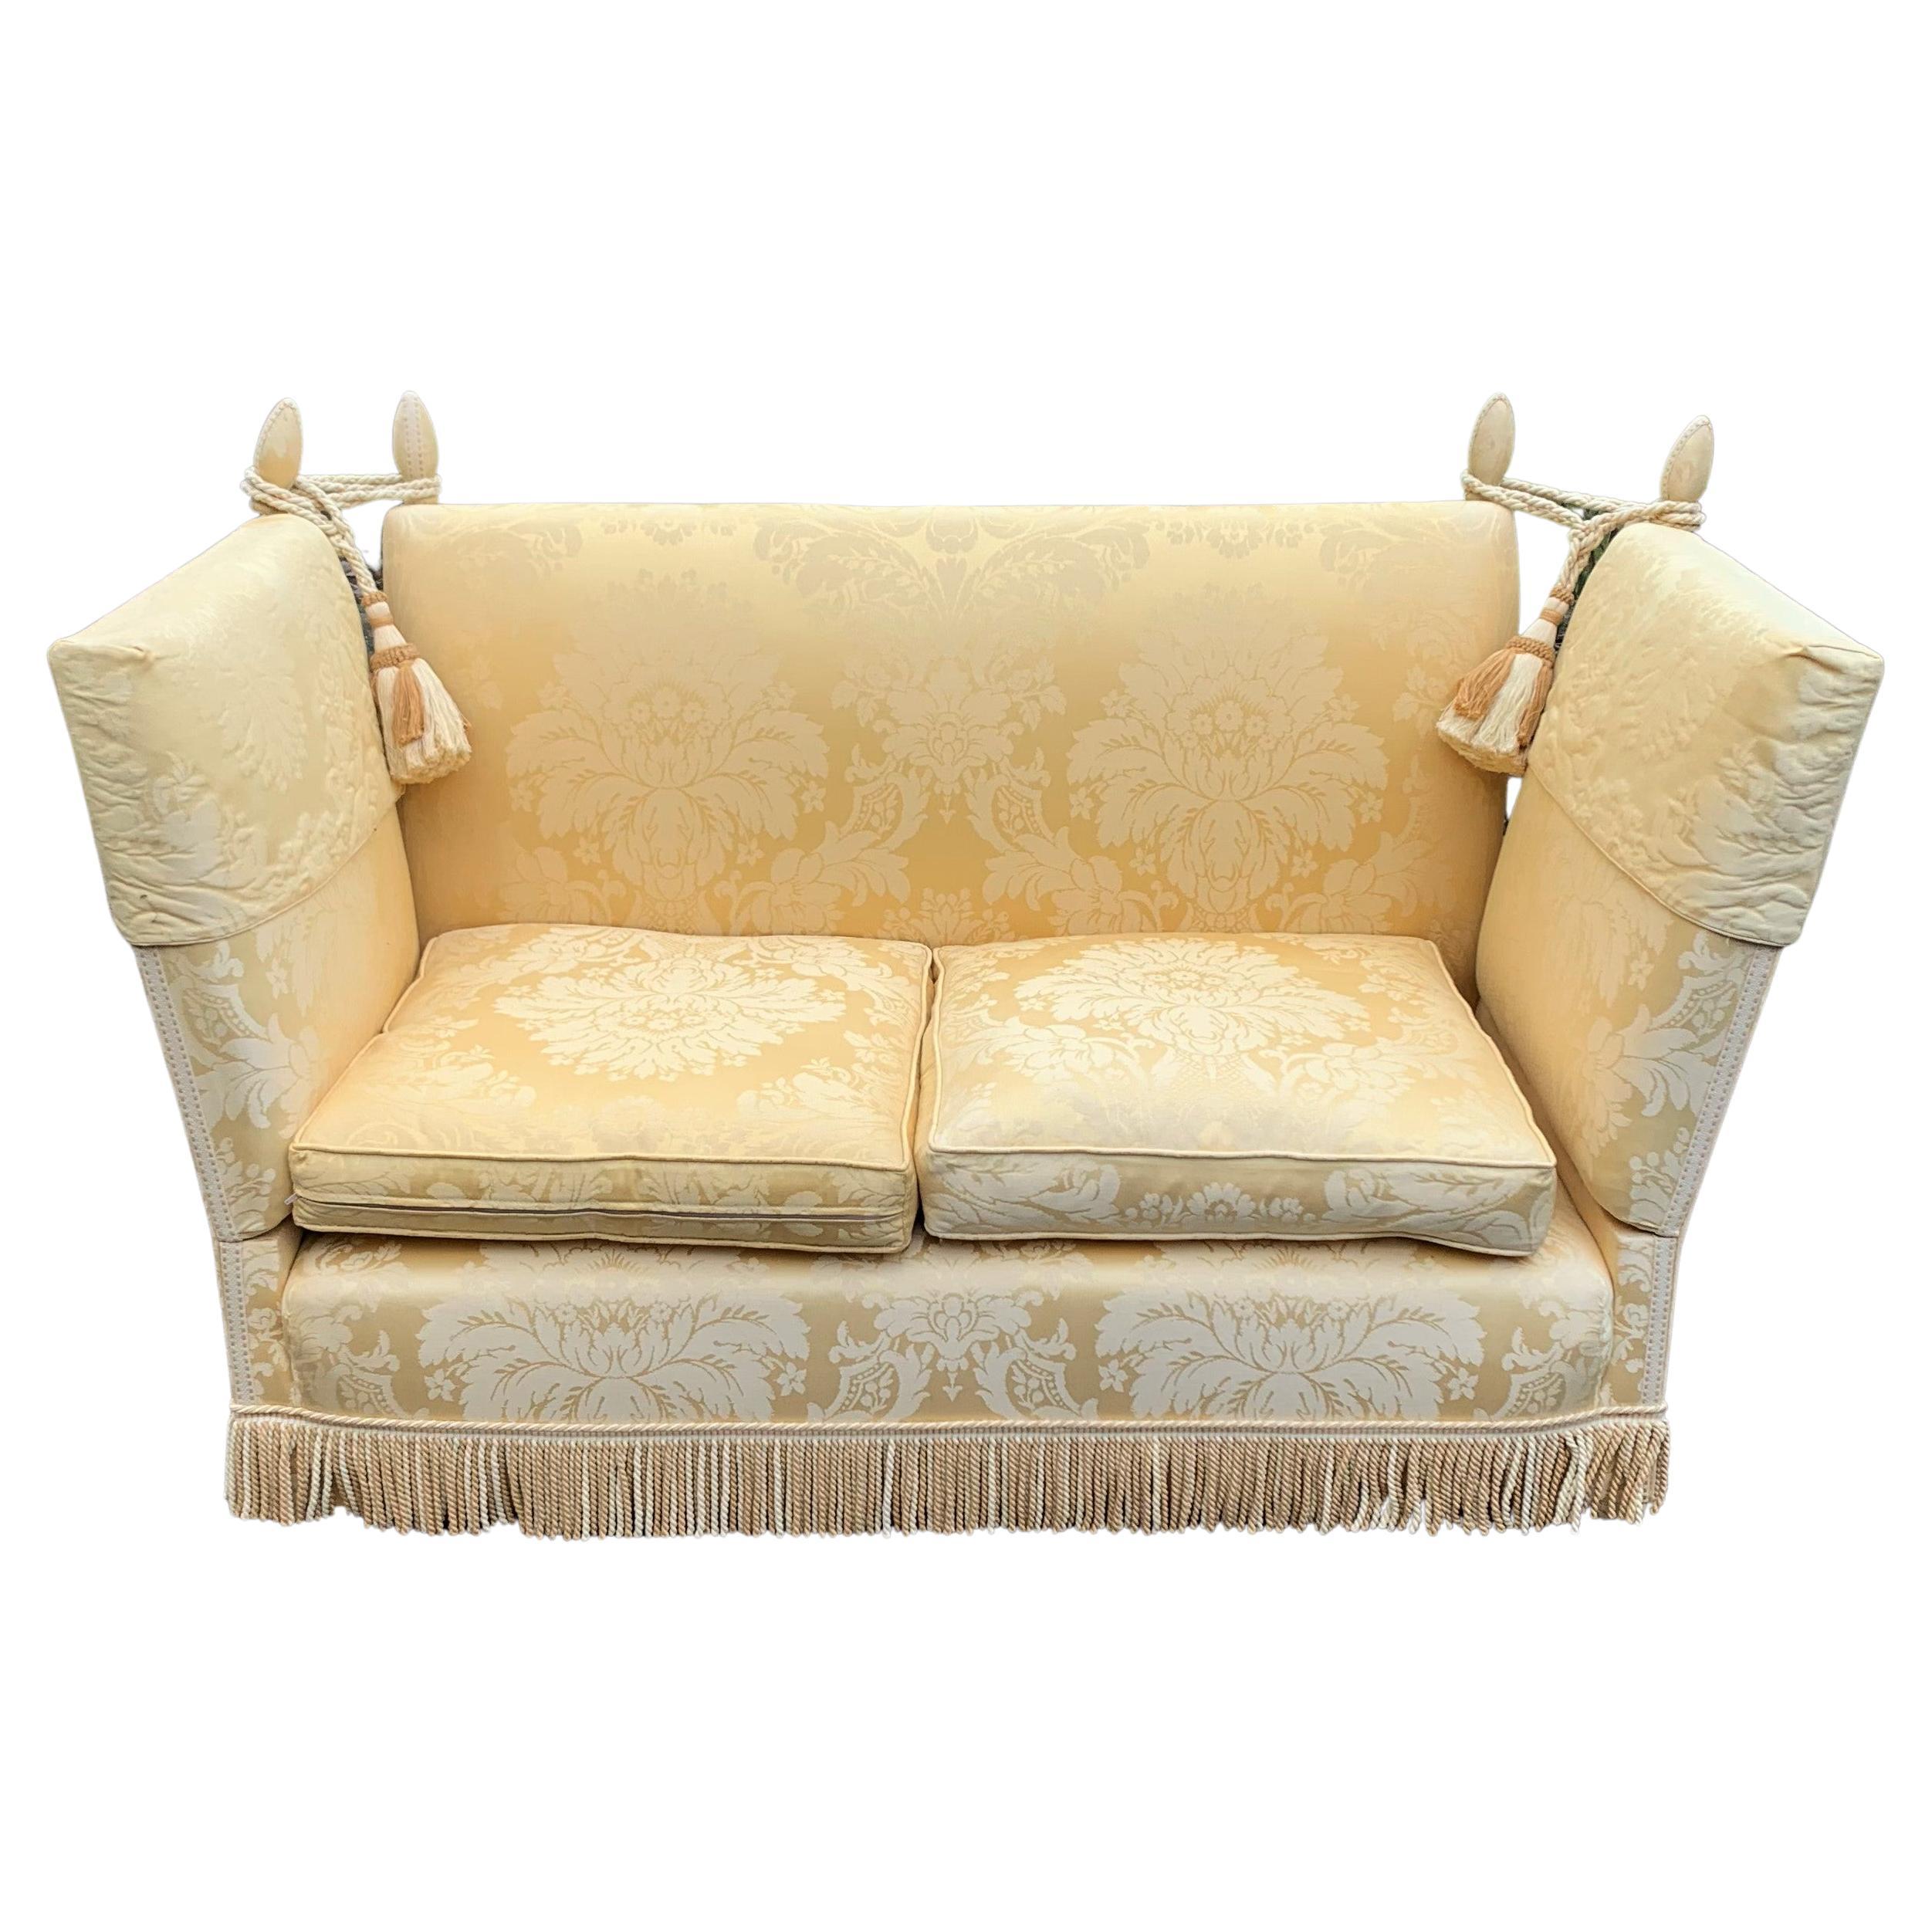 Early 20th Century Knole Settee For Sale